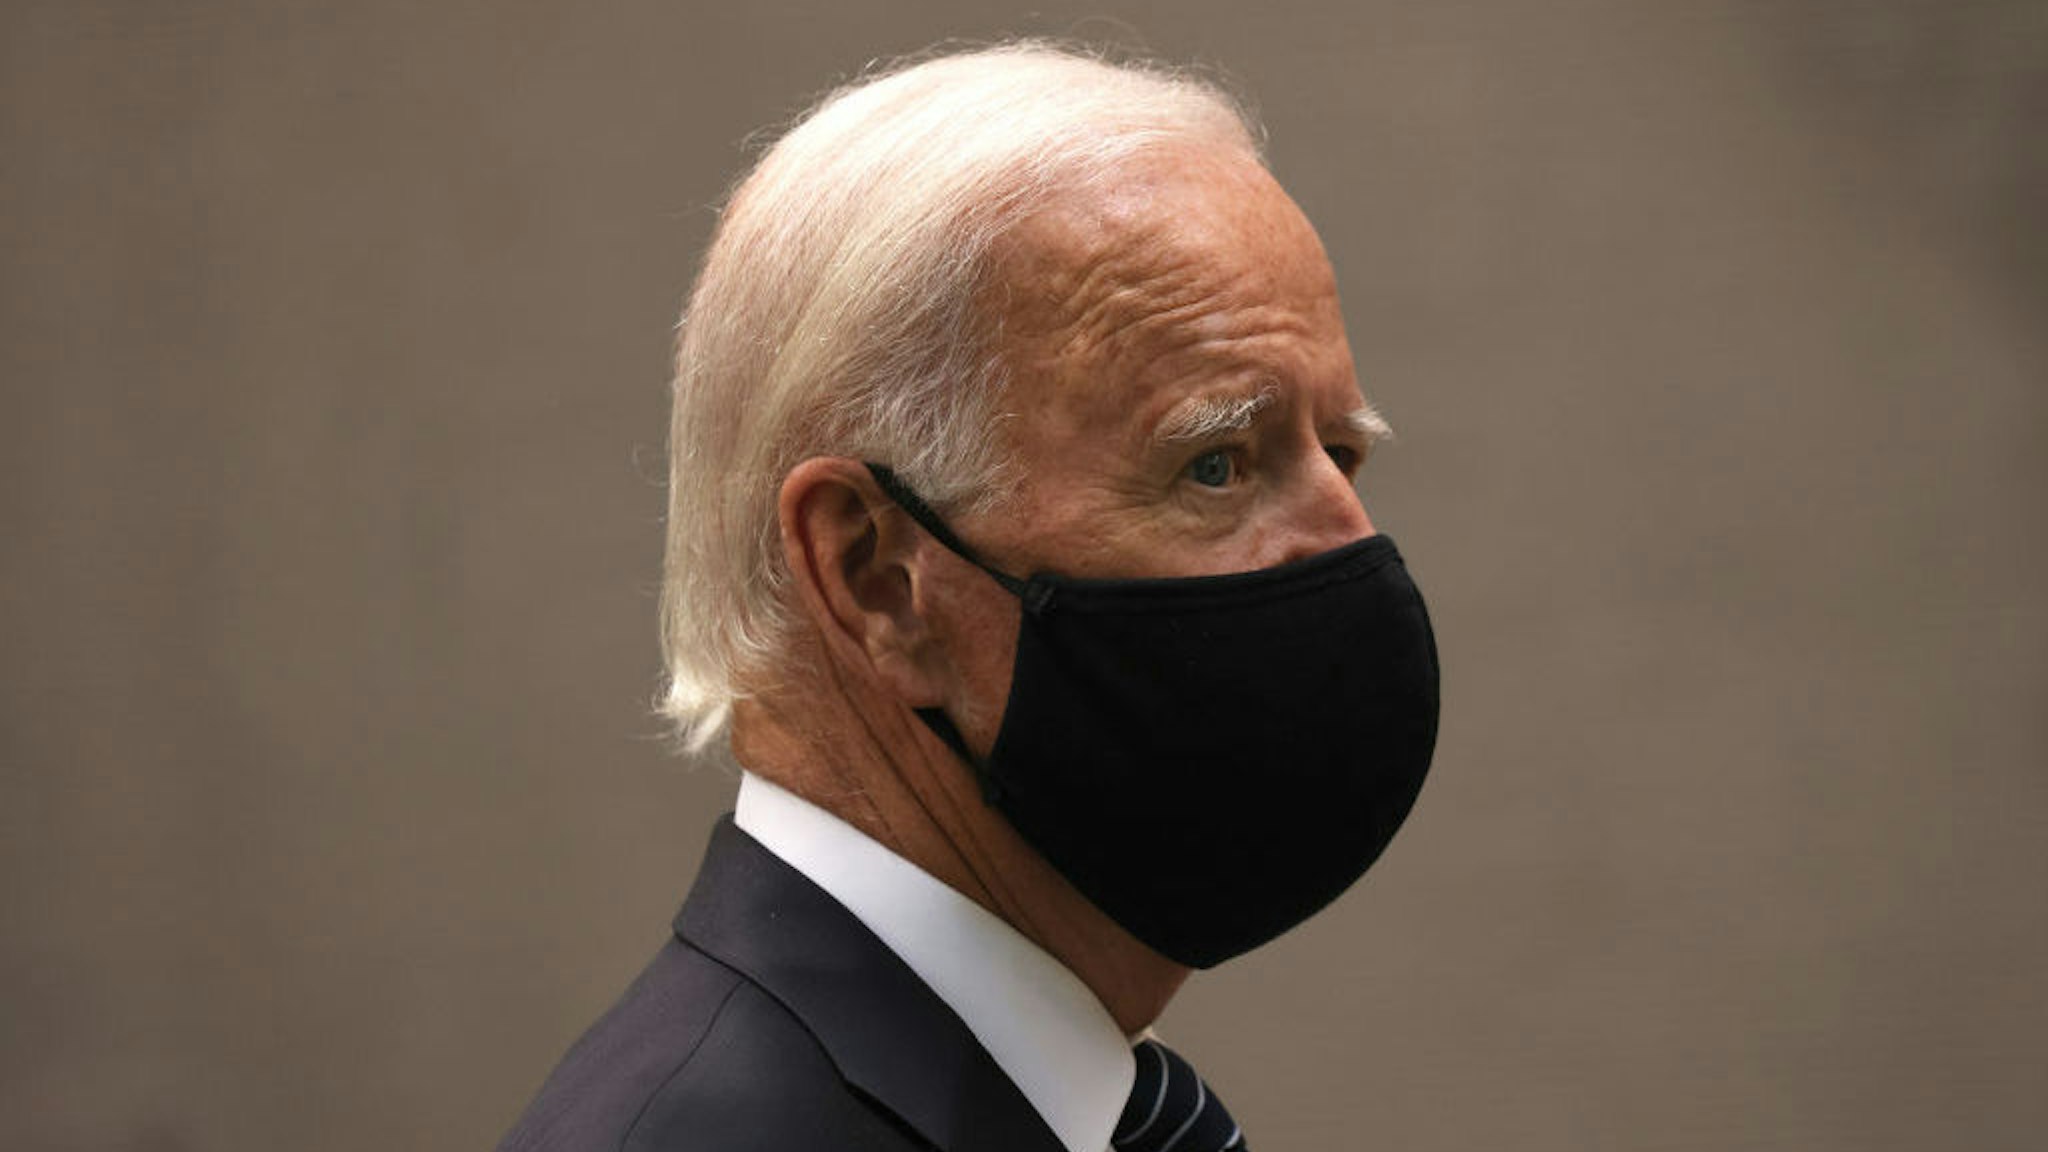 NEW YORK, NEW YORK - SEPTEMBER 11: Democratic Presidential Candidate Joe Biden attends a 9/11 memorial service at the National September 11 Memorial and Museum on September 11, 2020 in New York City. The ceremony to remember those who were killed in the terror attacks 19 years ago will be altered this year in order to adhere to safety precautions around COVID-19 transmission. (Photo by Michael M. Santiago/Getty Images)